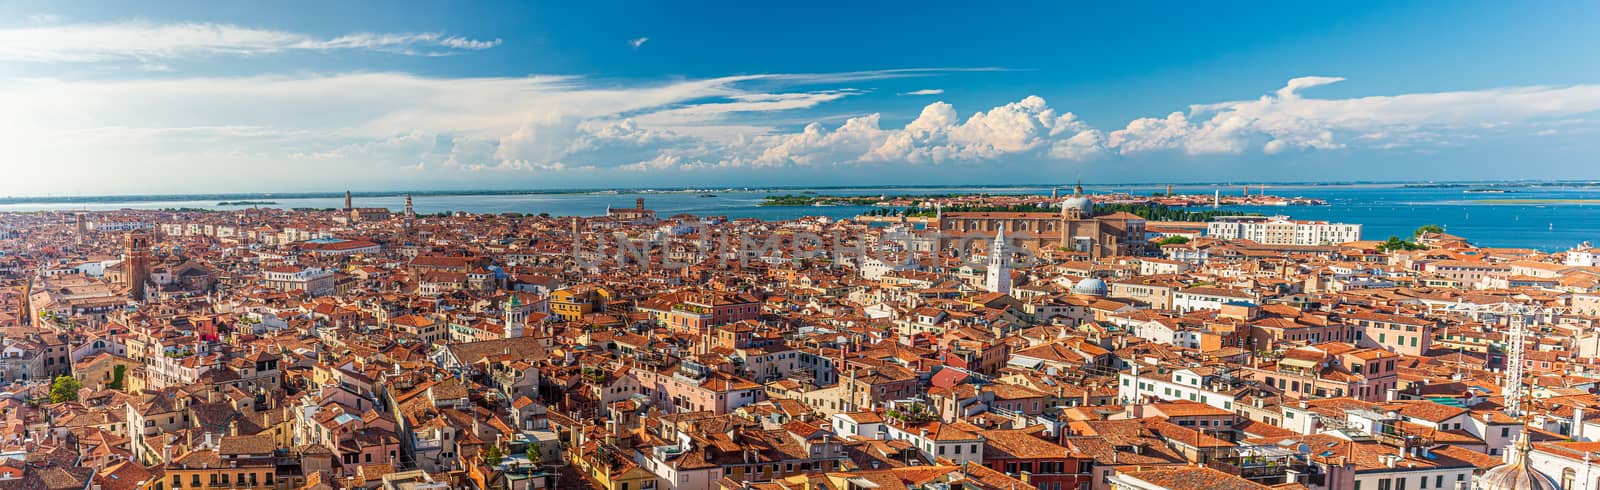 A panoramic view above the houses in Venice, Italy